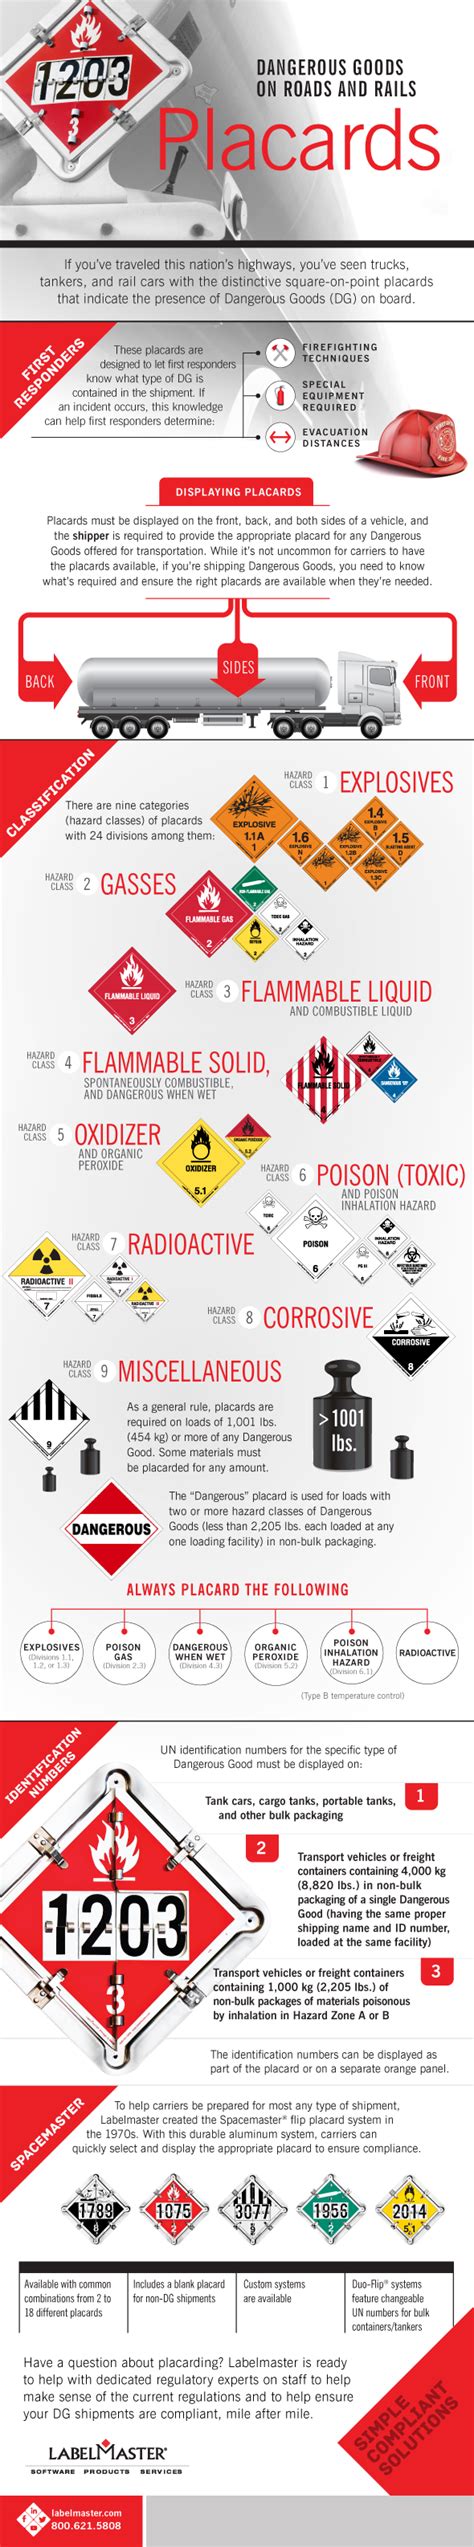 These classifications are based on how efficiently your mailpieces can be processed on postal service equipment. Infographic | Dangerous Goods on Roads and Rails: Placards | Labelmaster Blog